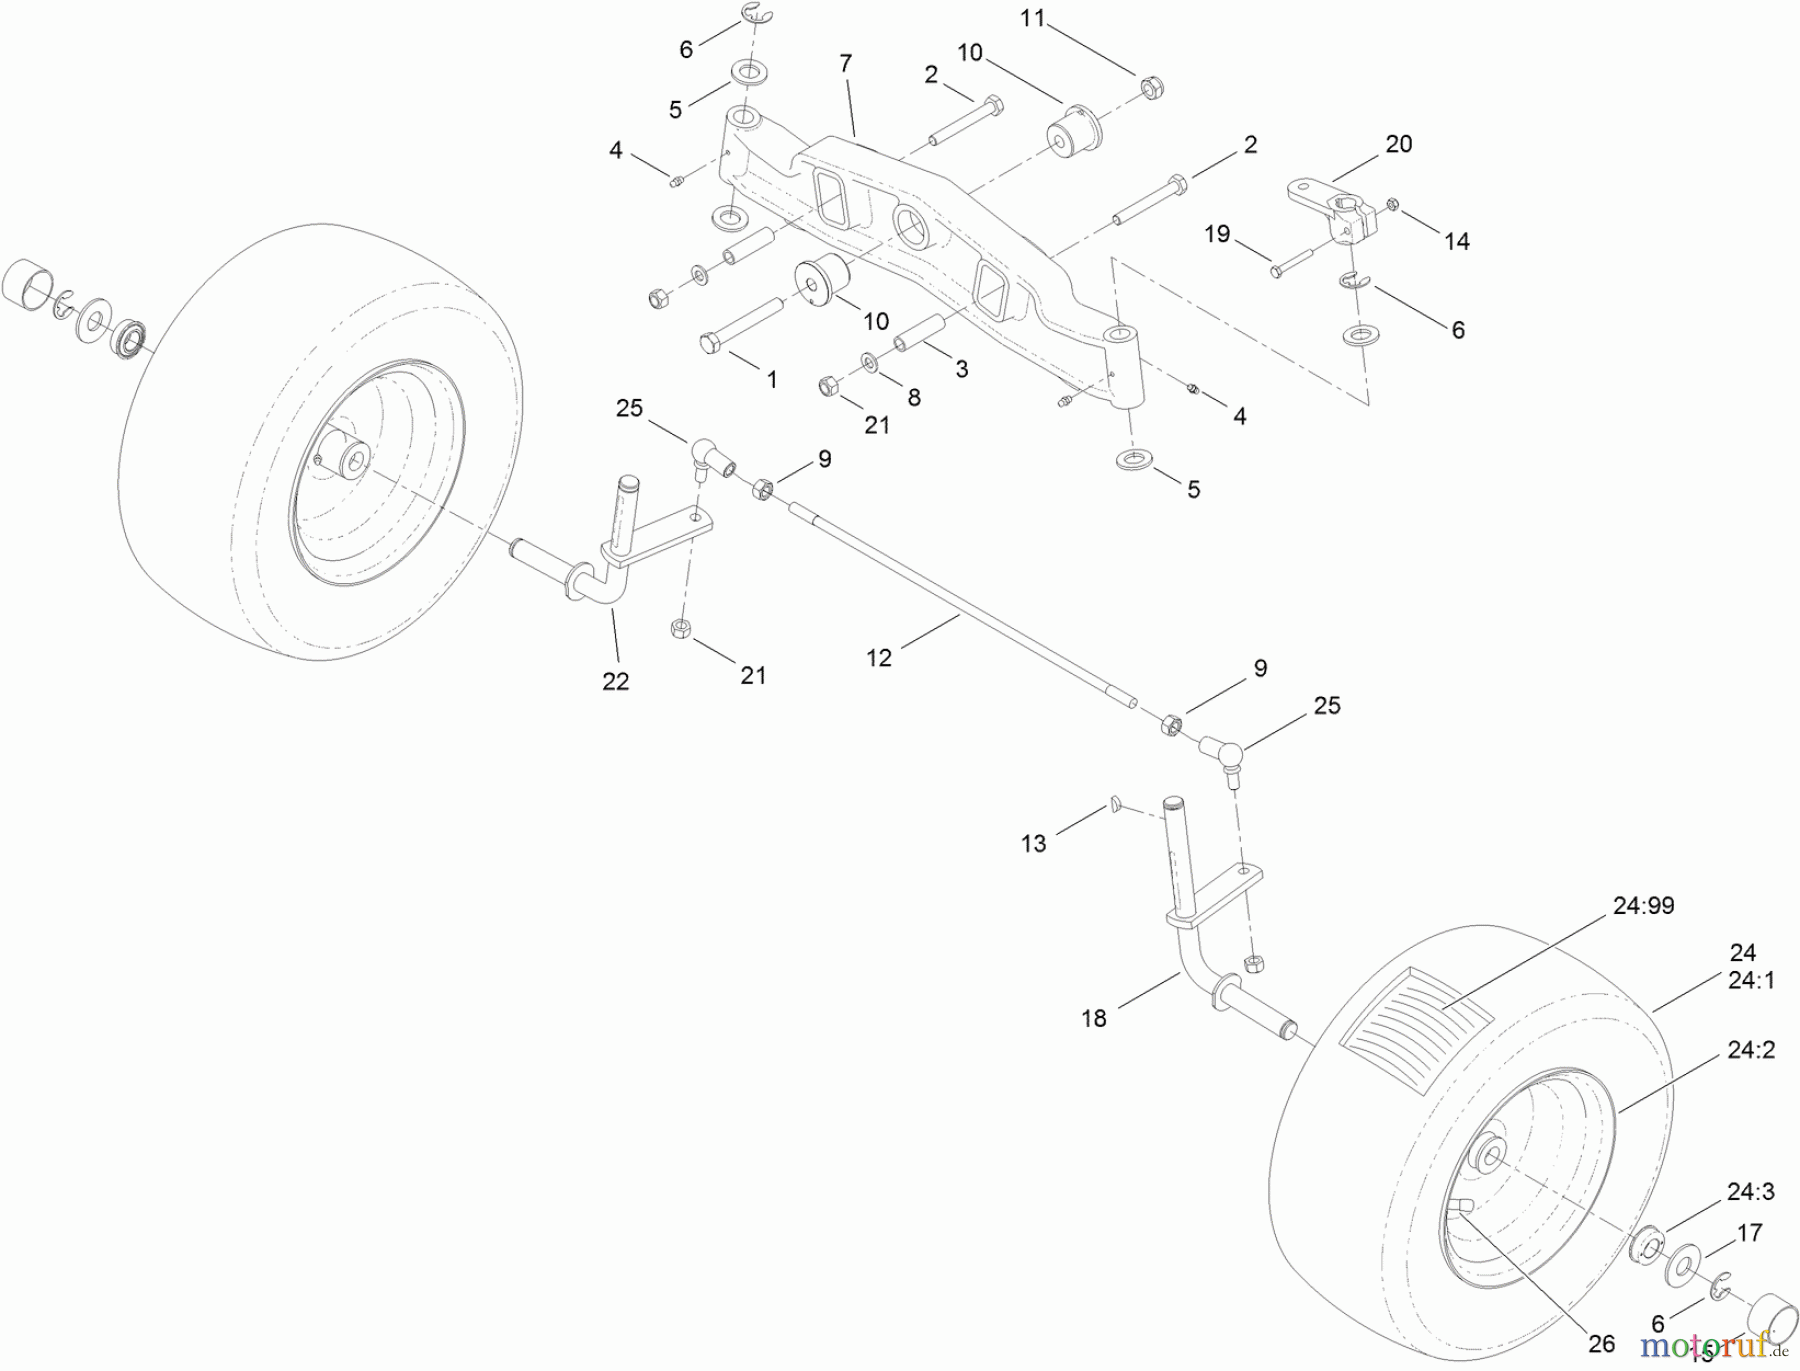  Toro Neu Mowers, Lawn & Garden Tractor Seite 1 74593 (DH 220) - Toro DH 220 Lawn Tractor, 2011 (311000001-311000400) FRONT AXLE ASSEMBLY